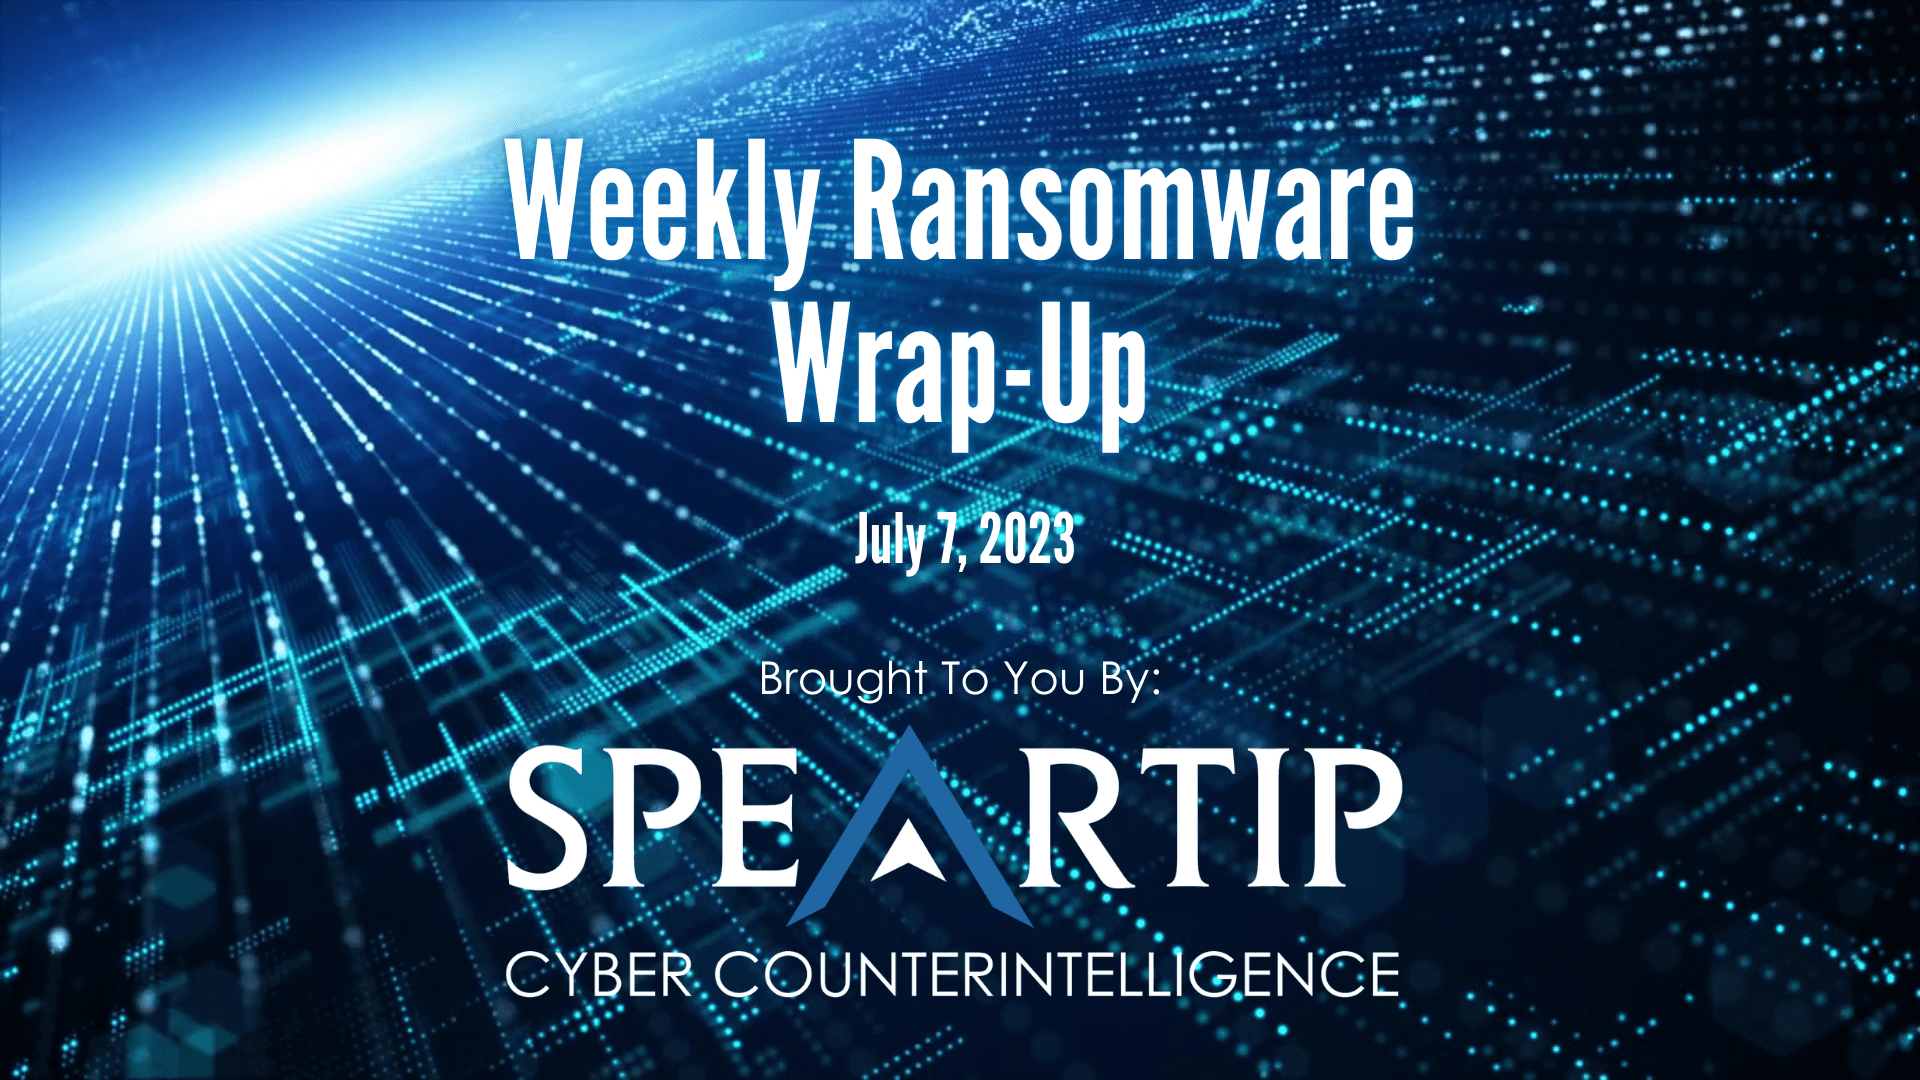 July-7-2023-Weekly Ransomware Wrap-up